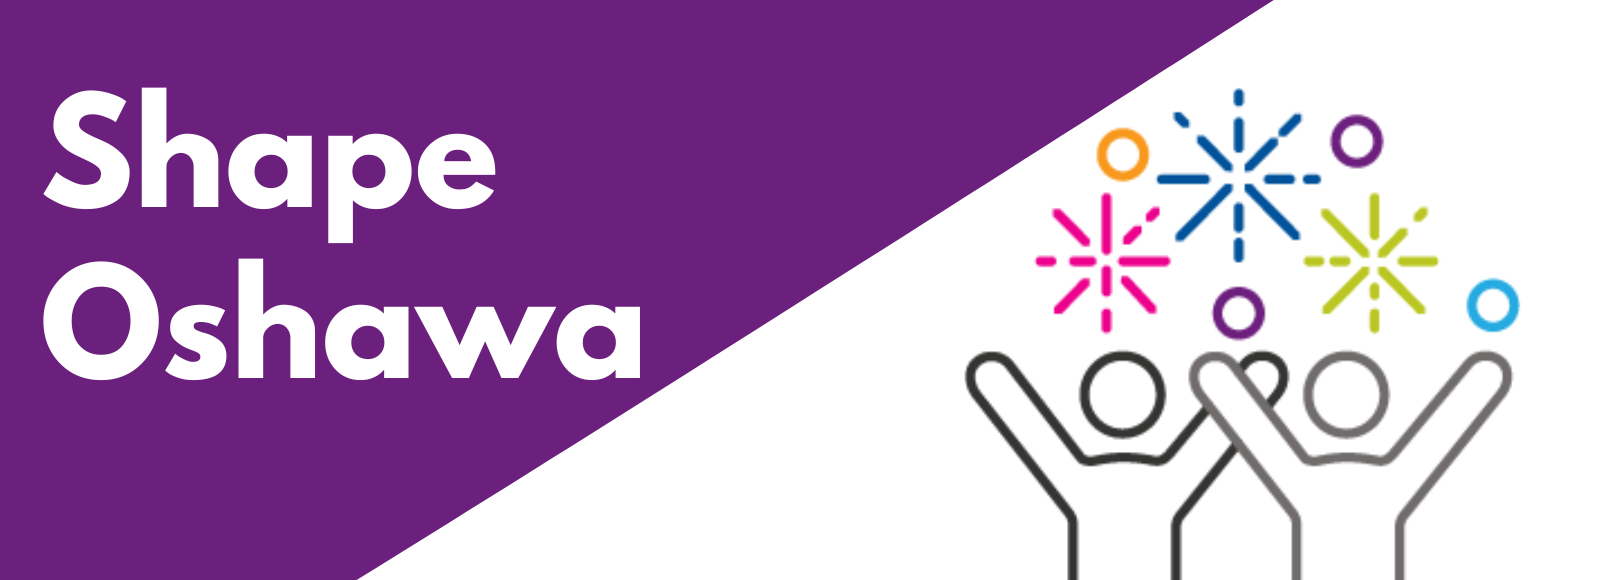 graphic of people with arms raised and colour bursts above their heads with white text on a purple background that reads "Shape Oshawa" 